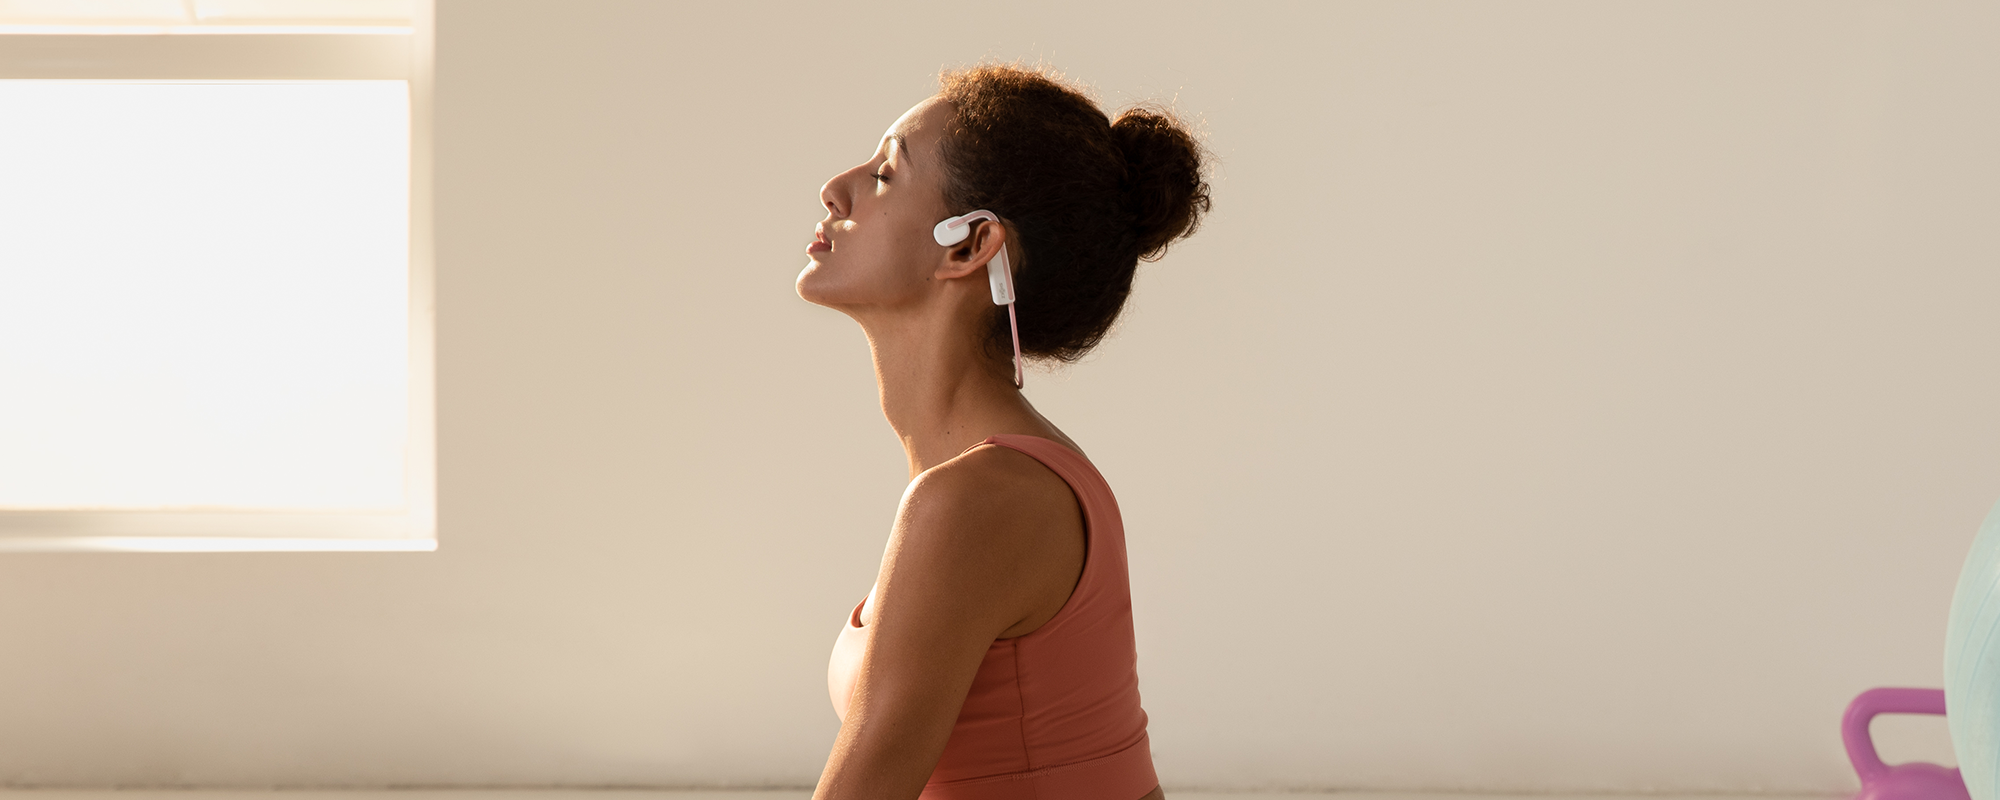 Image of a woman in an empty, well-lit room with eyes closed wearing Shokz OpenMove headphones